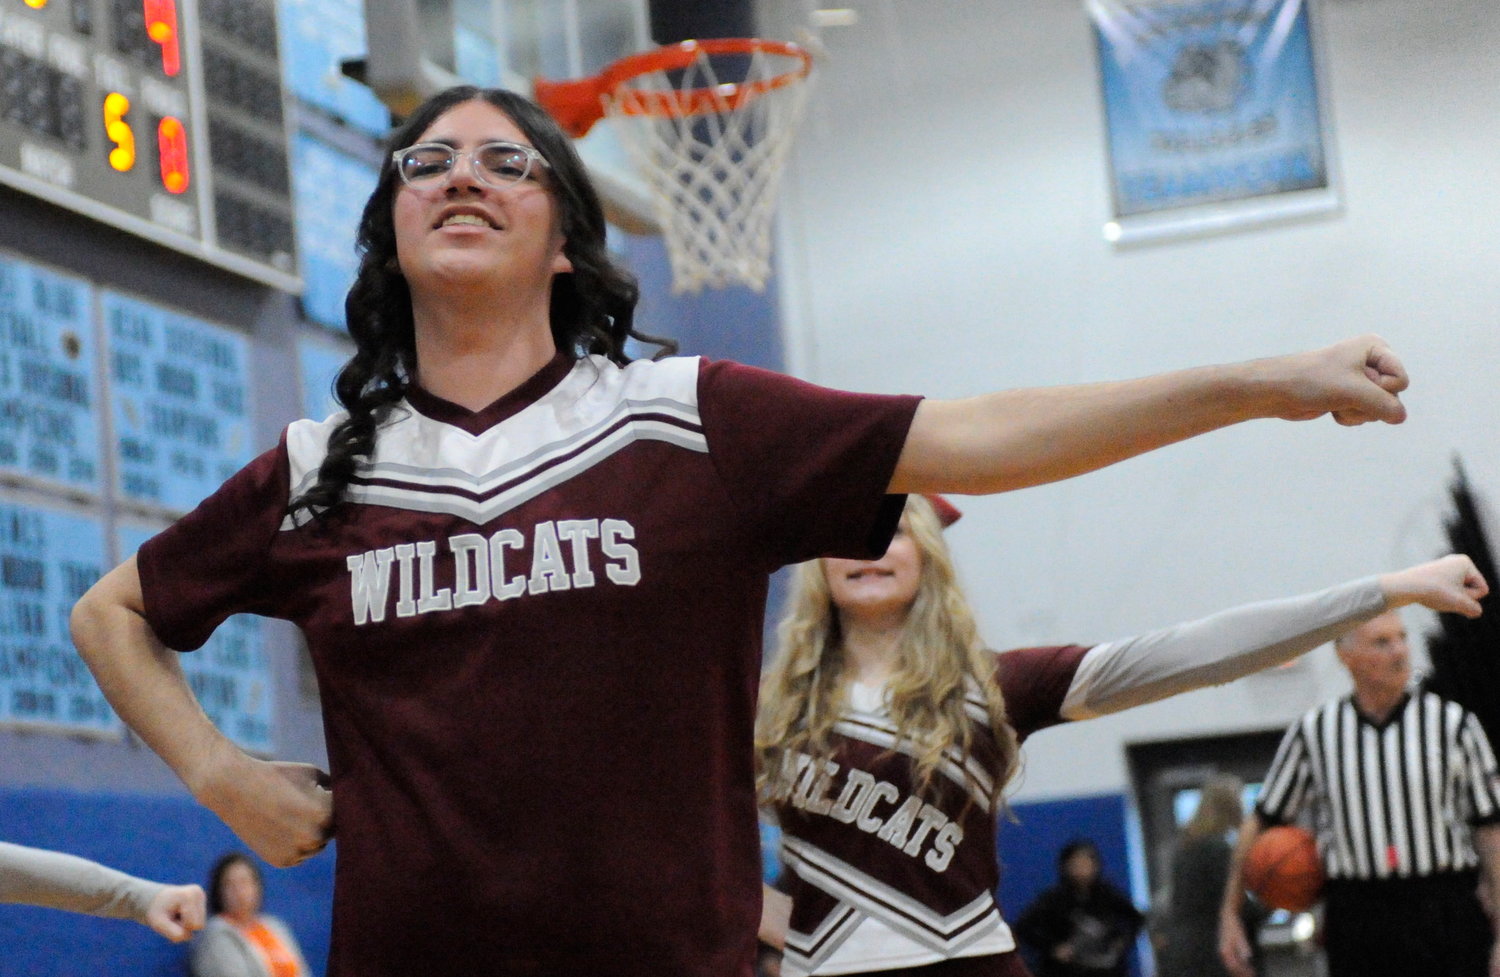 Leading a cheer. Anthony Mendoza, an 18-year-old senior, leads the Wildcats’ cheer squad.